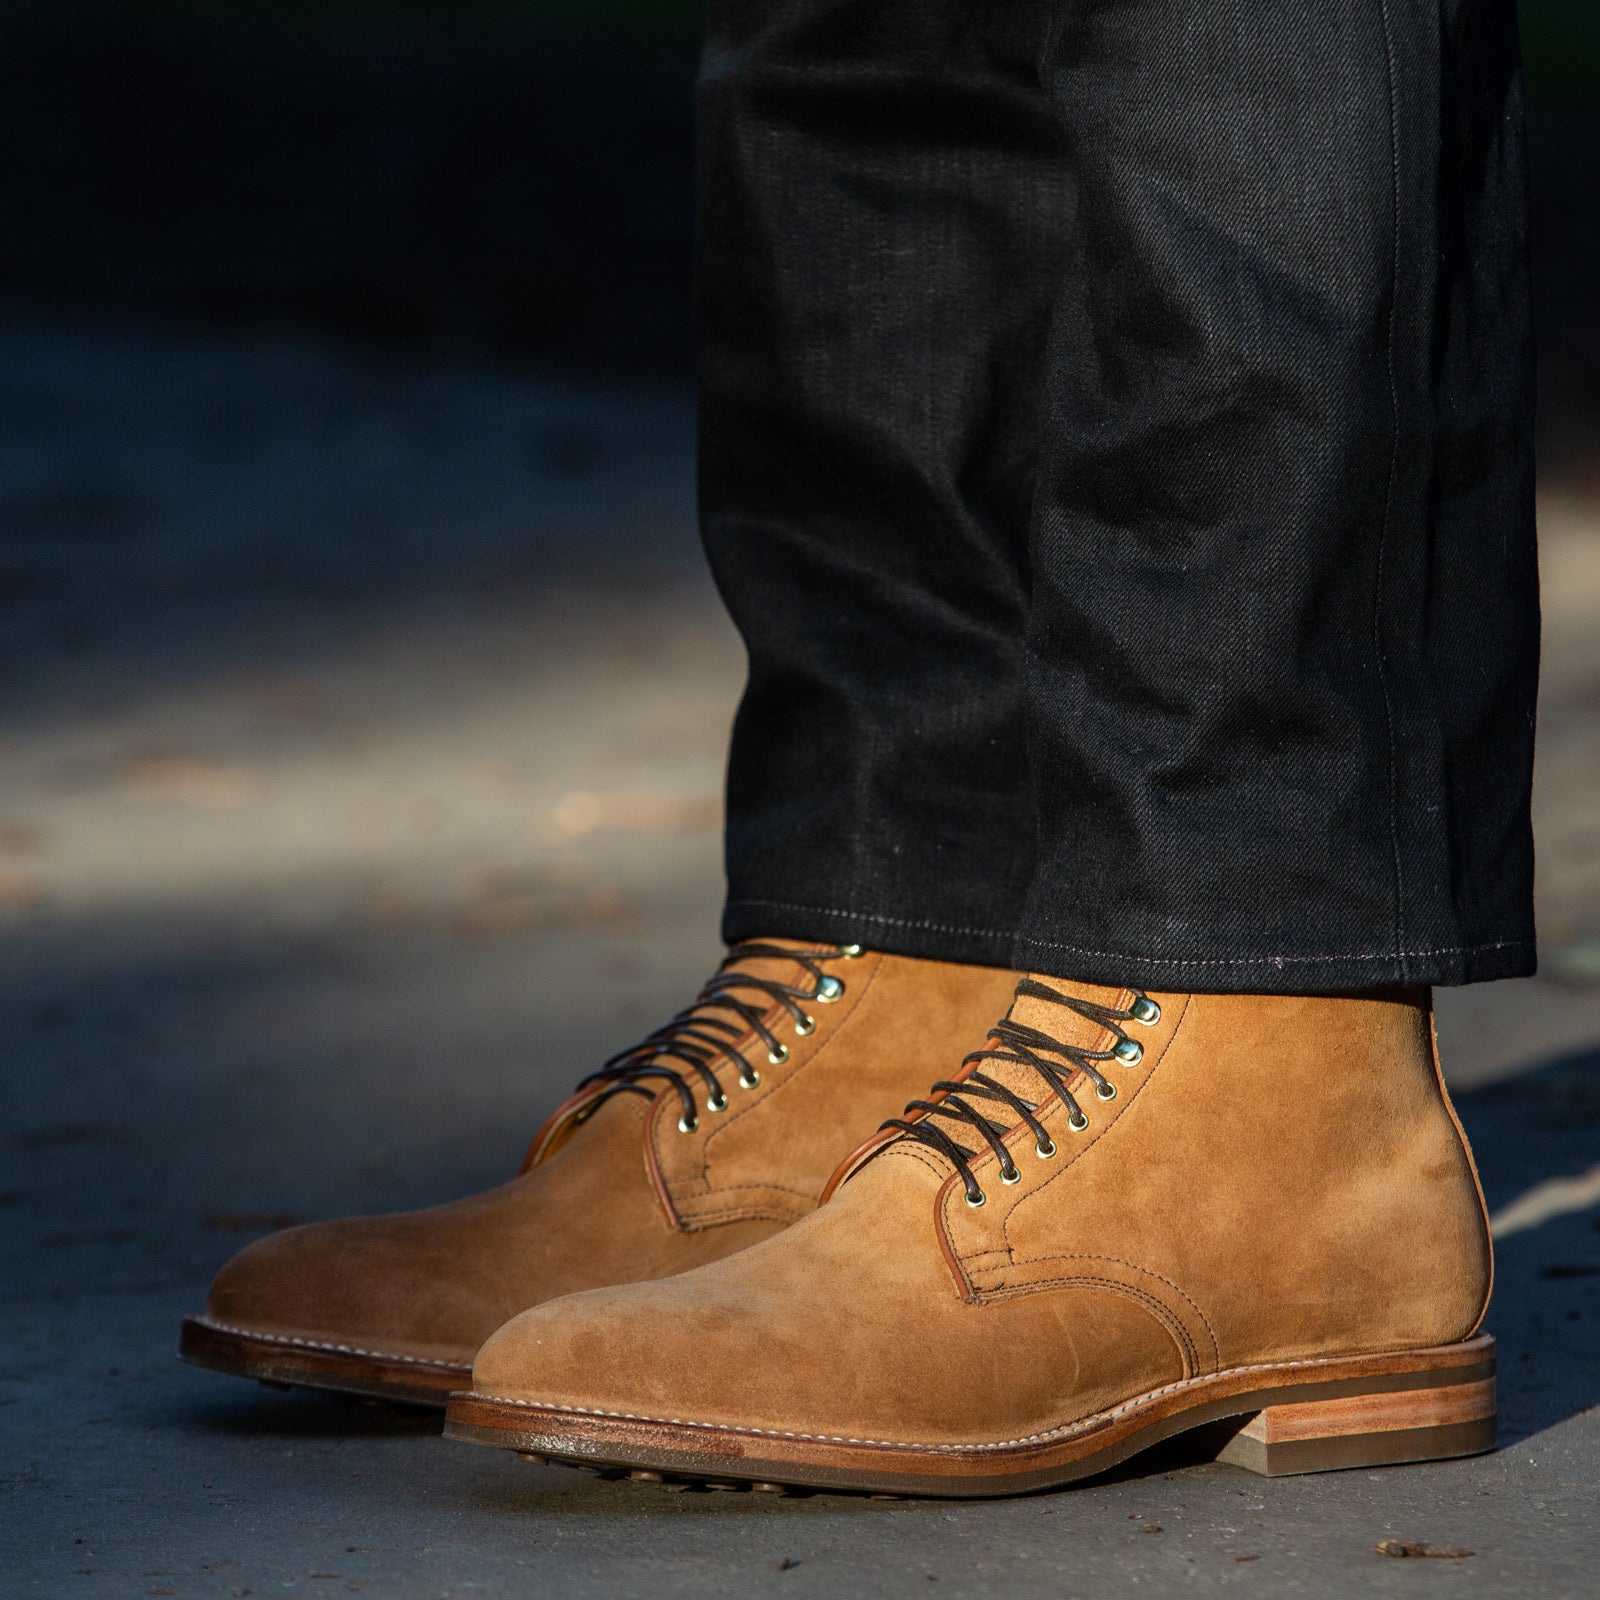 viberg suede service boot